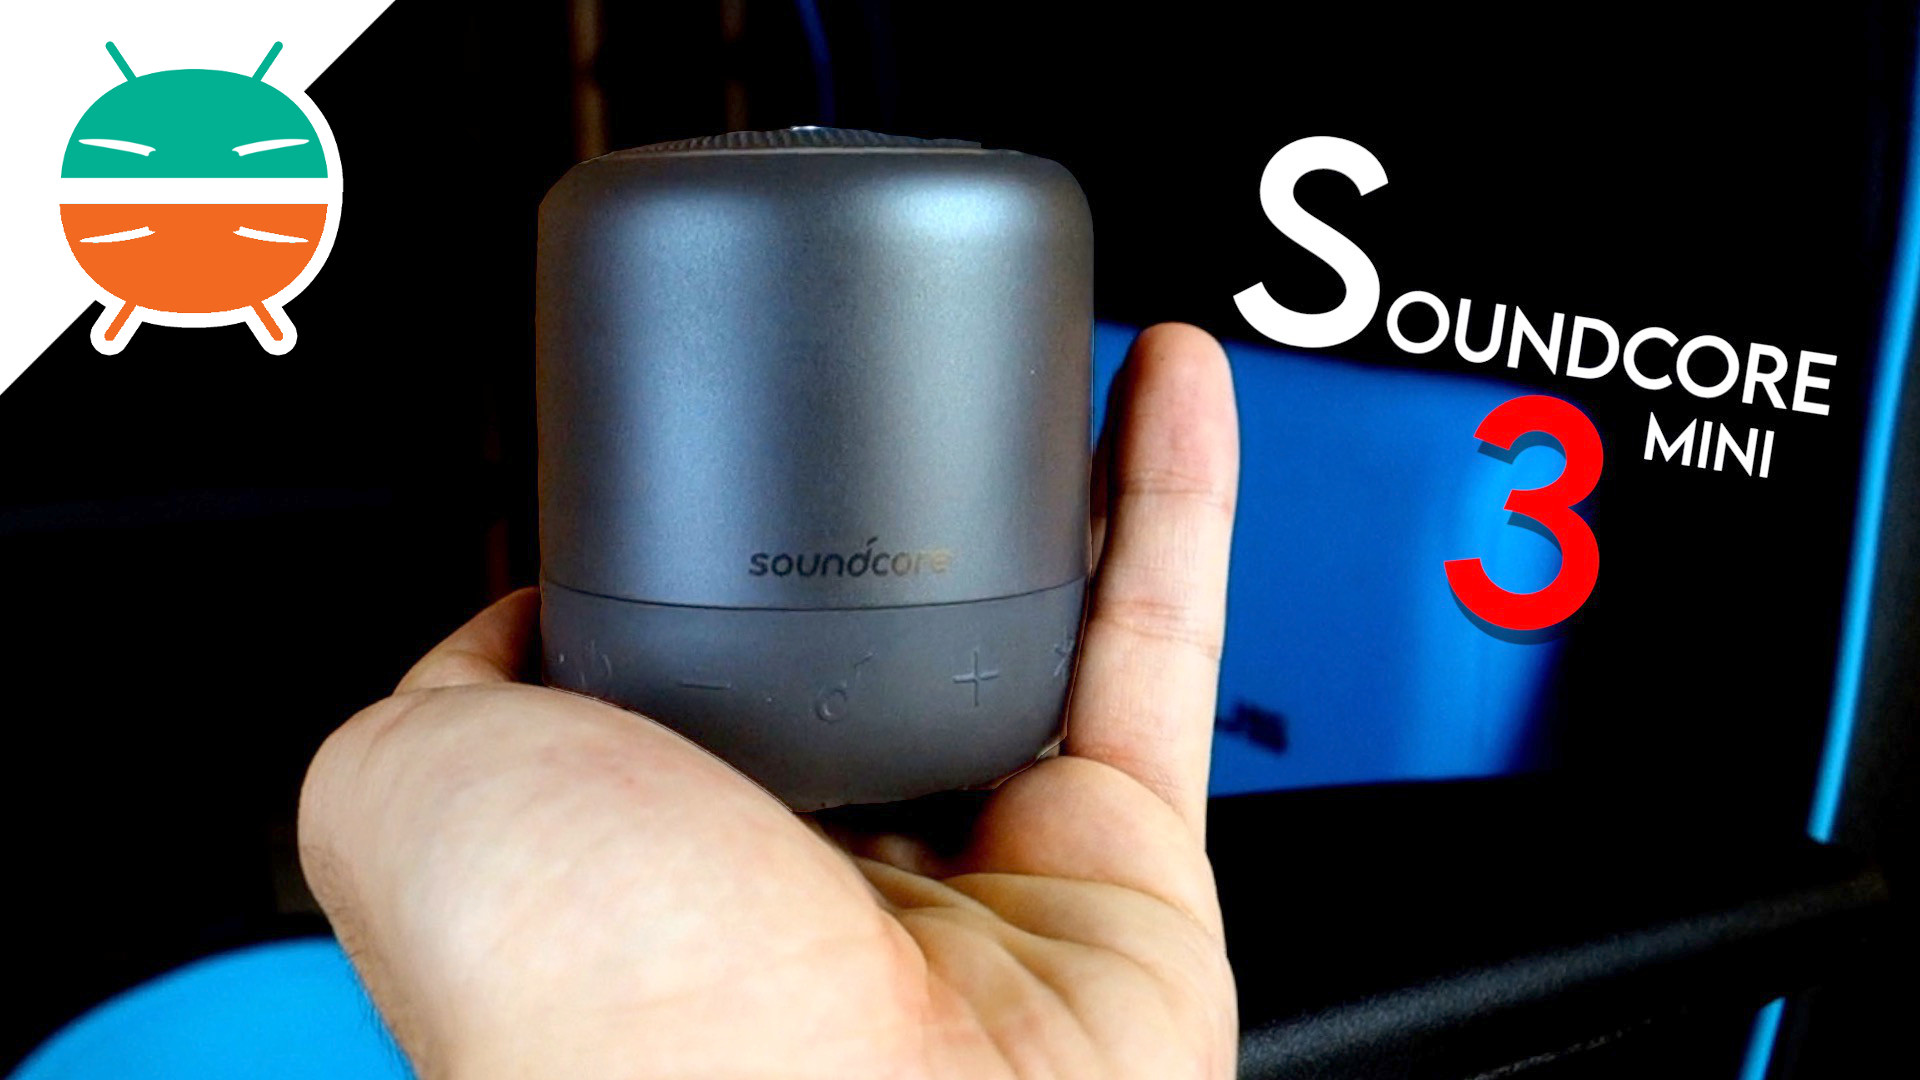 Soundcore Mini review: don't be fooled by the size